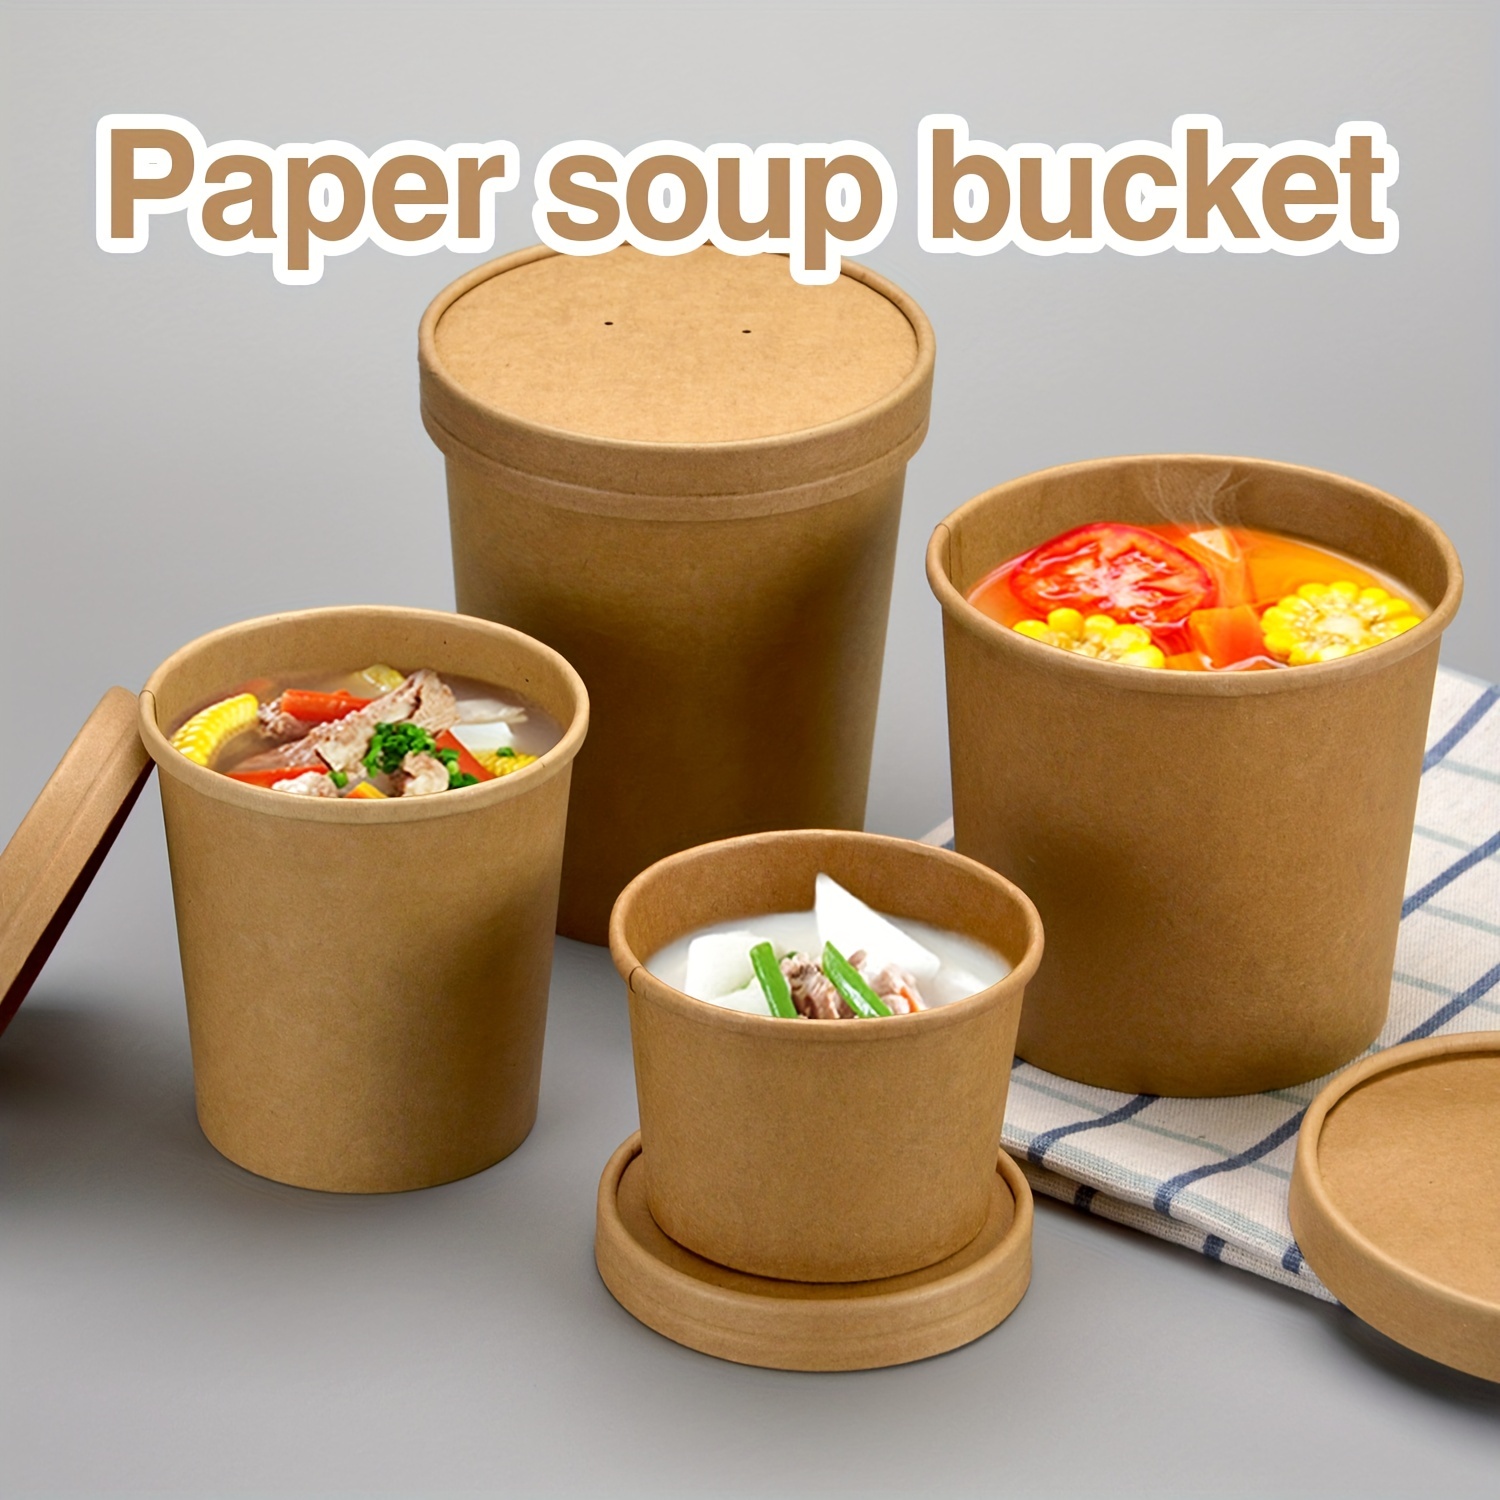 Large Container of Soup - Catering Menu & Family-Size Items - Doormét -  Cafe in Tampa, FL